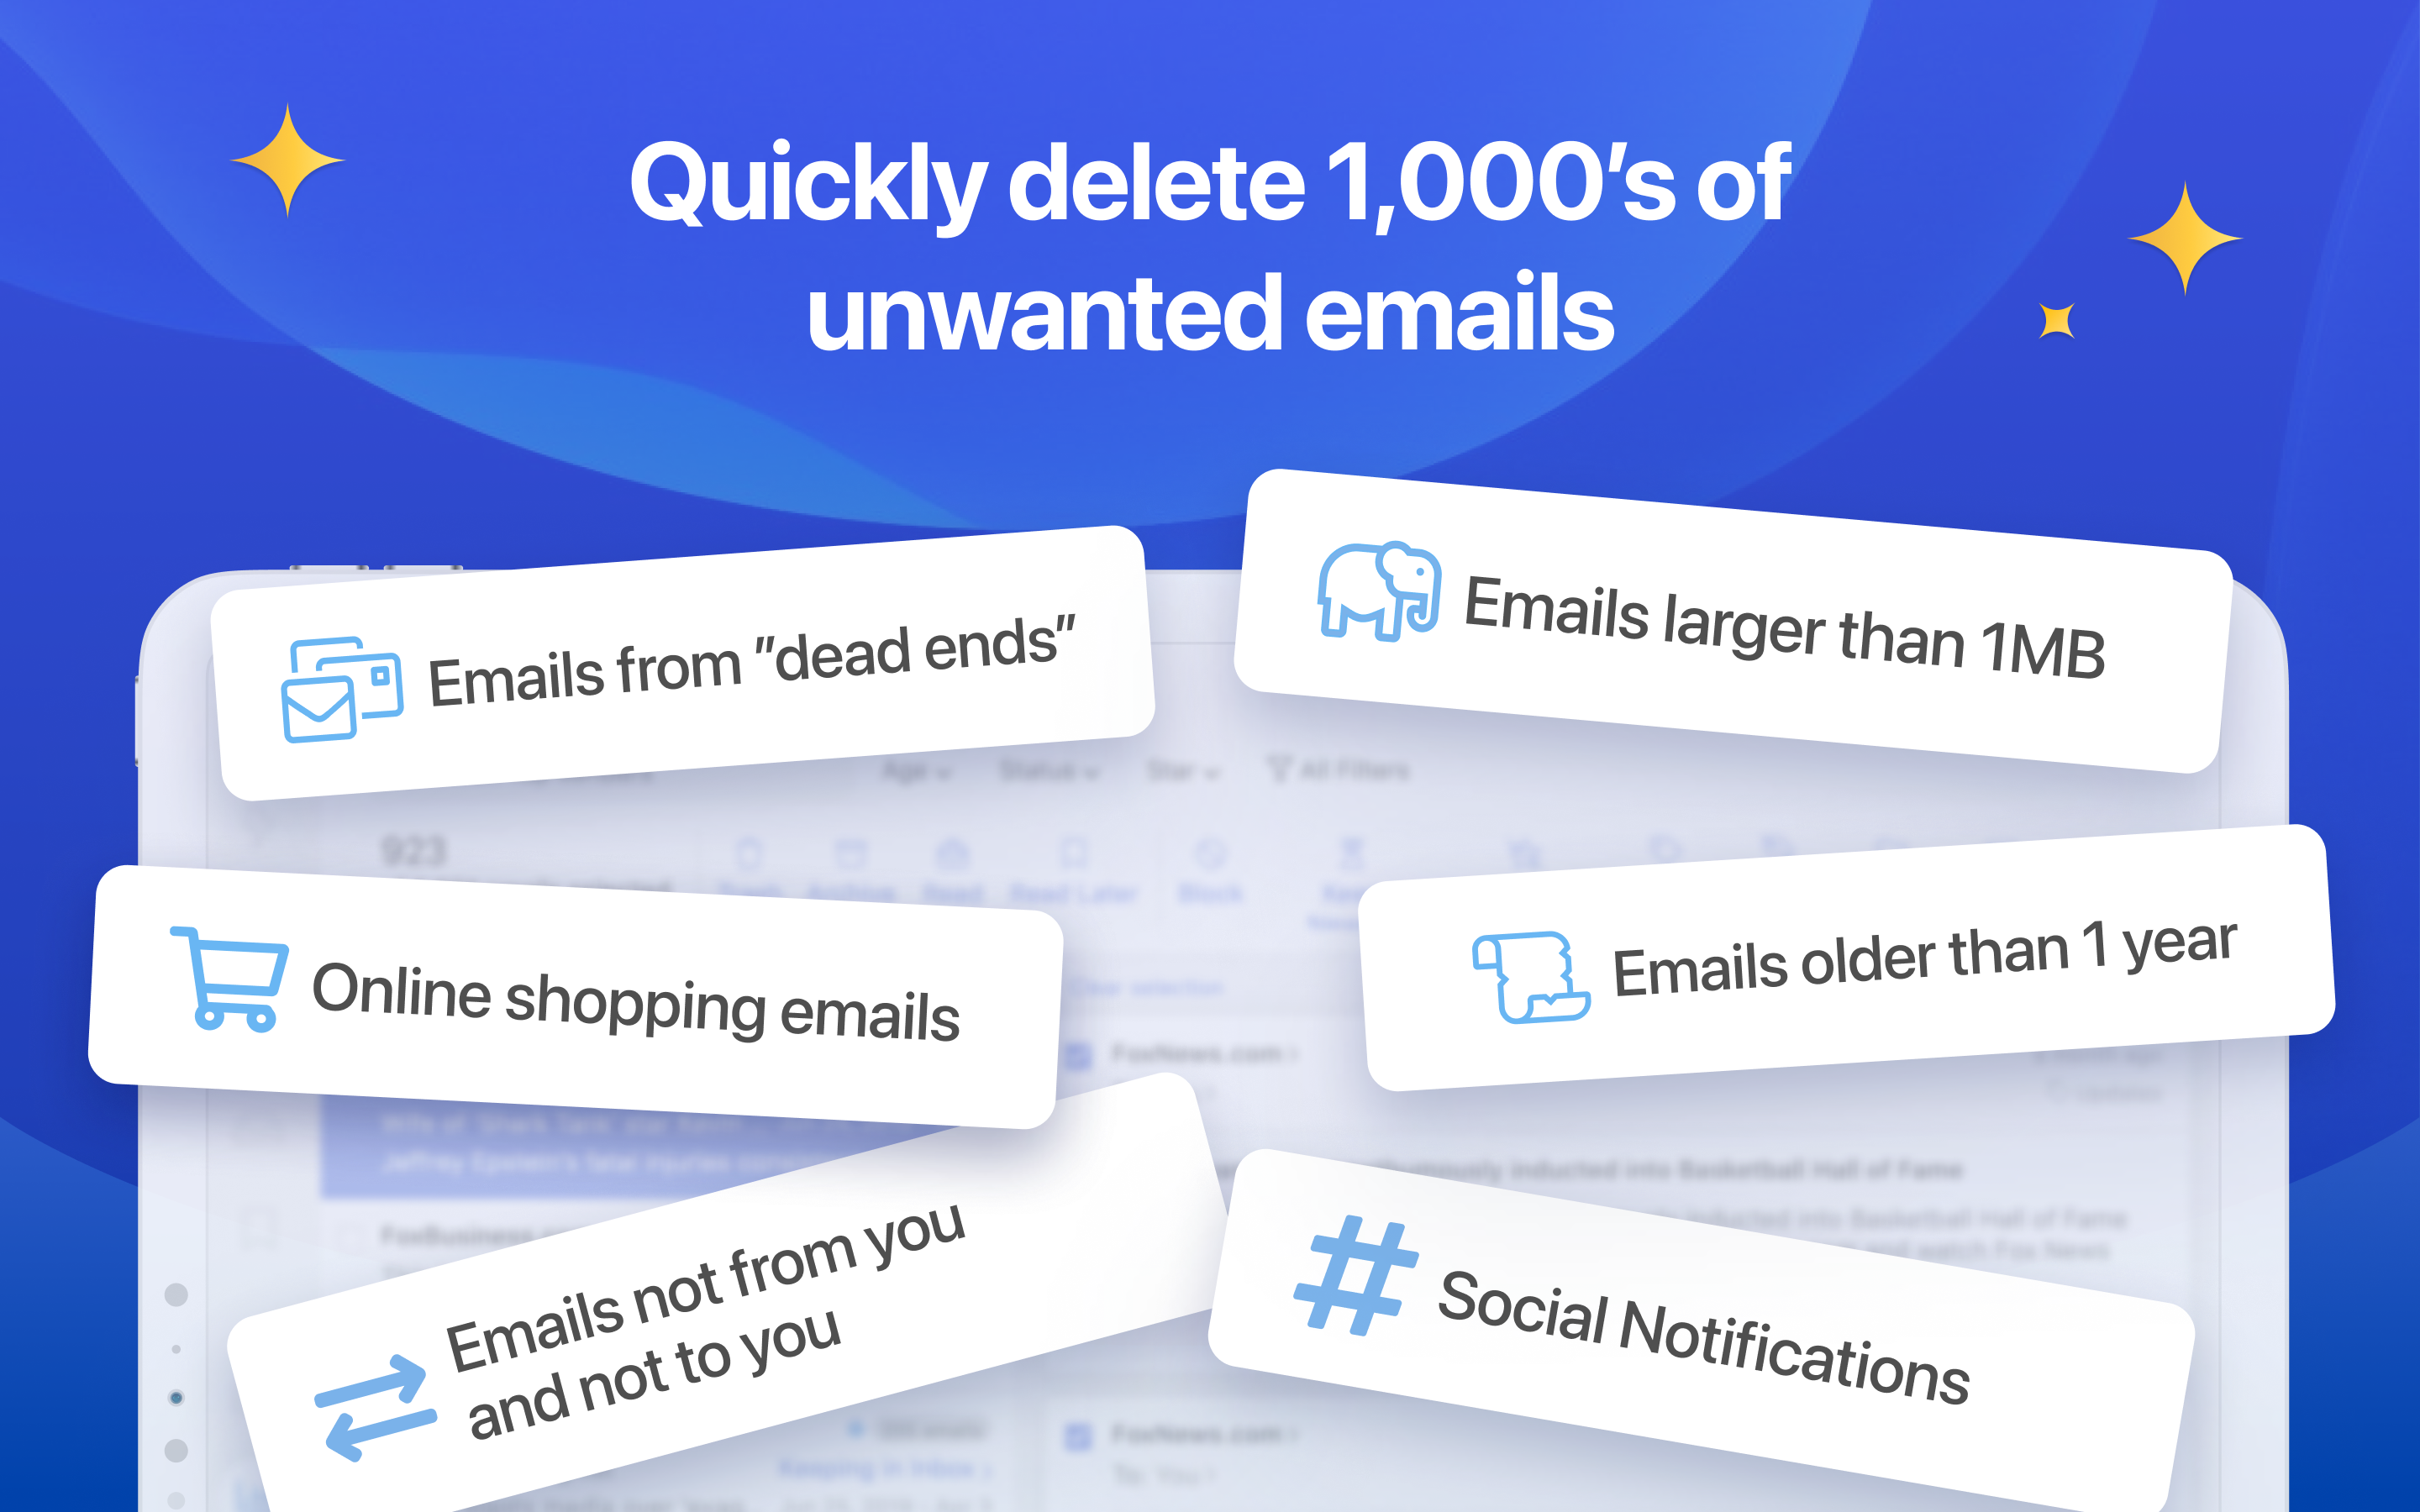 Quickly delete 1,000's of unwanted emails